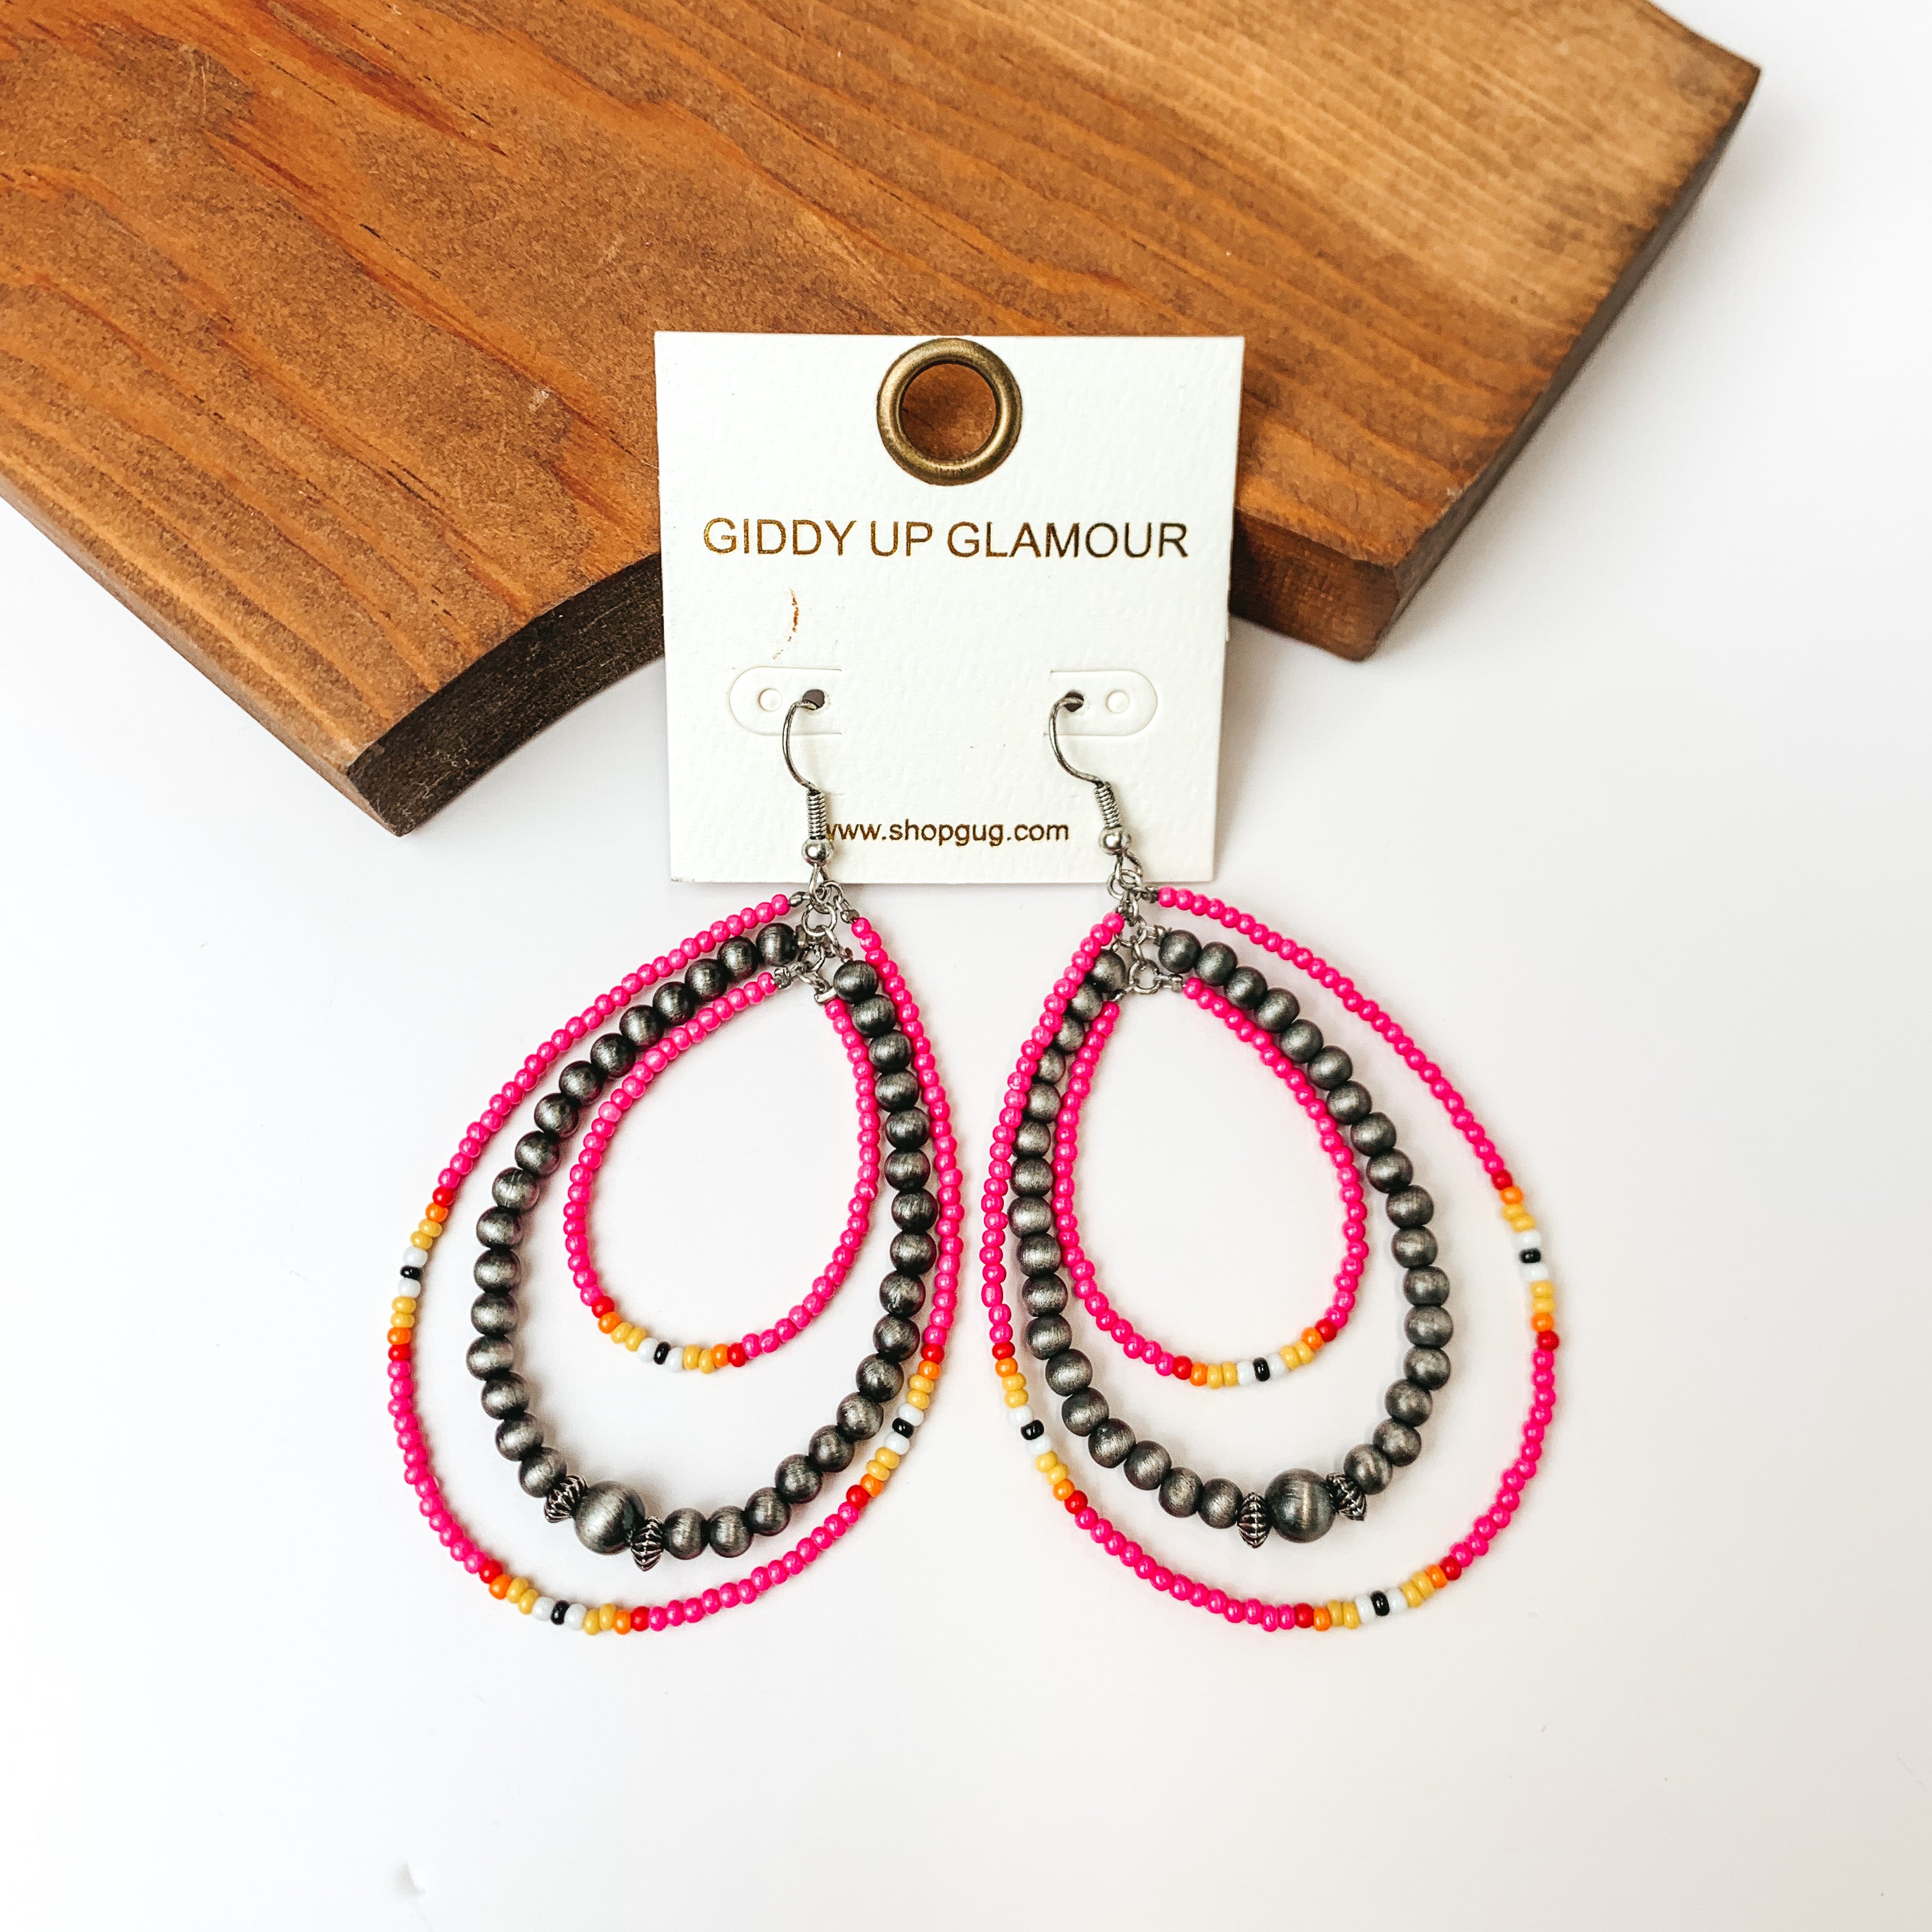 Western Style Triple Open Teardrop Earrings In Silver Tone and Hot Pink. Pictured on a white background with a piece of wood behind the earrings. 